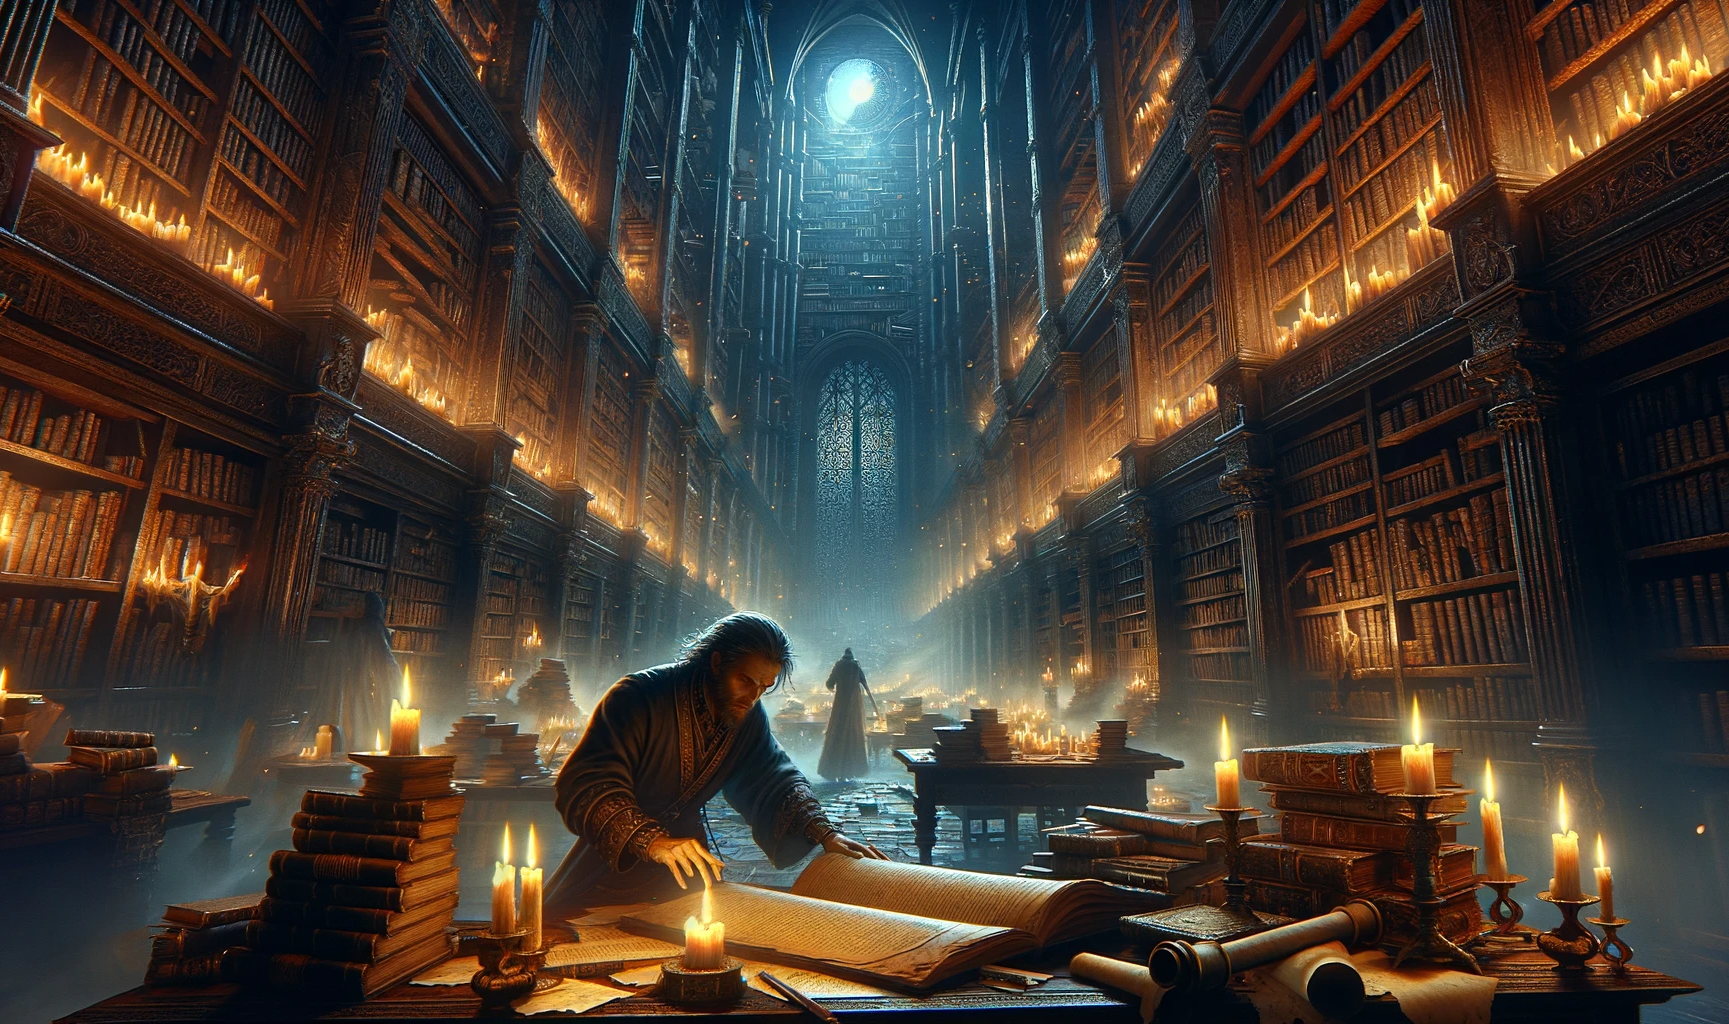 ' from a fantasy novel. The setting is a vast, ancient library at night, filled with towering shelves of bo